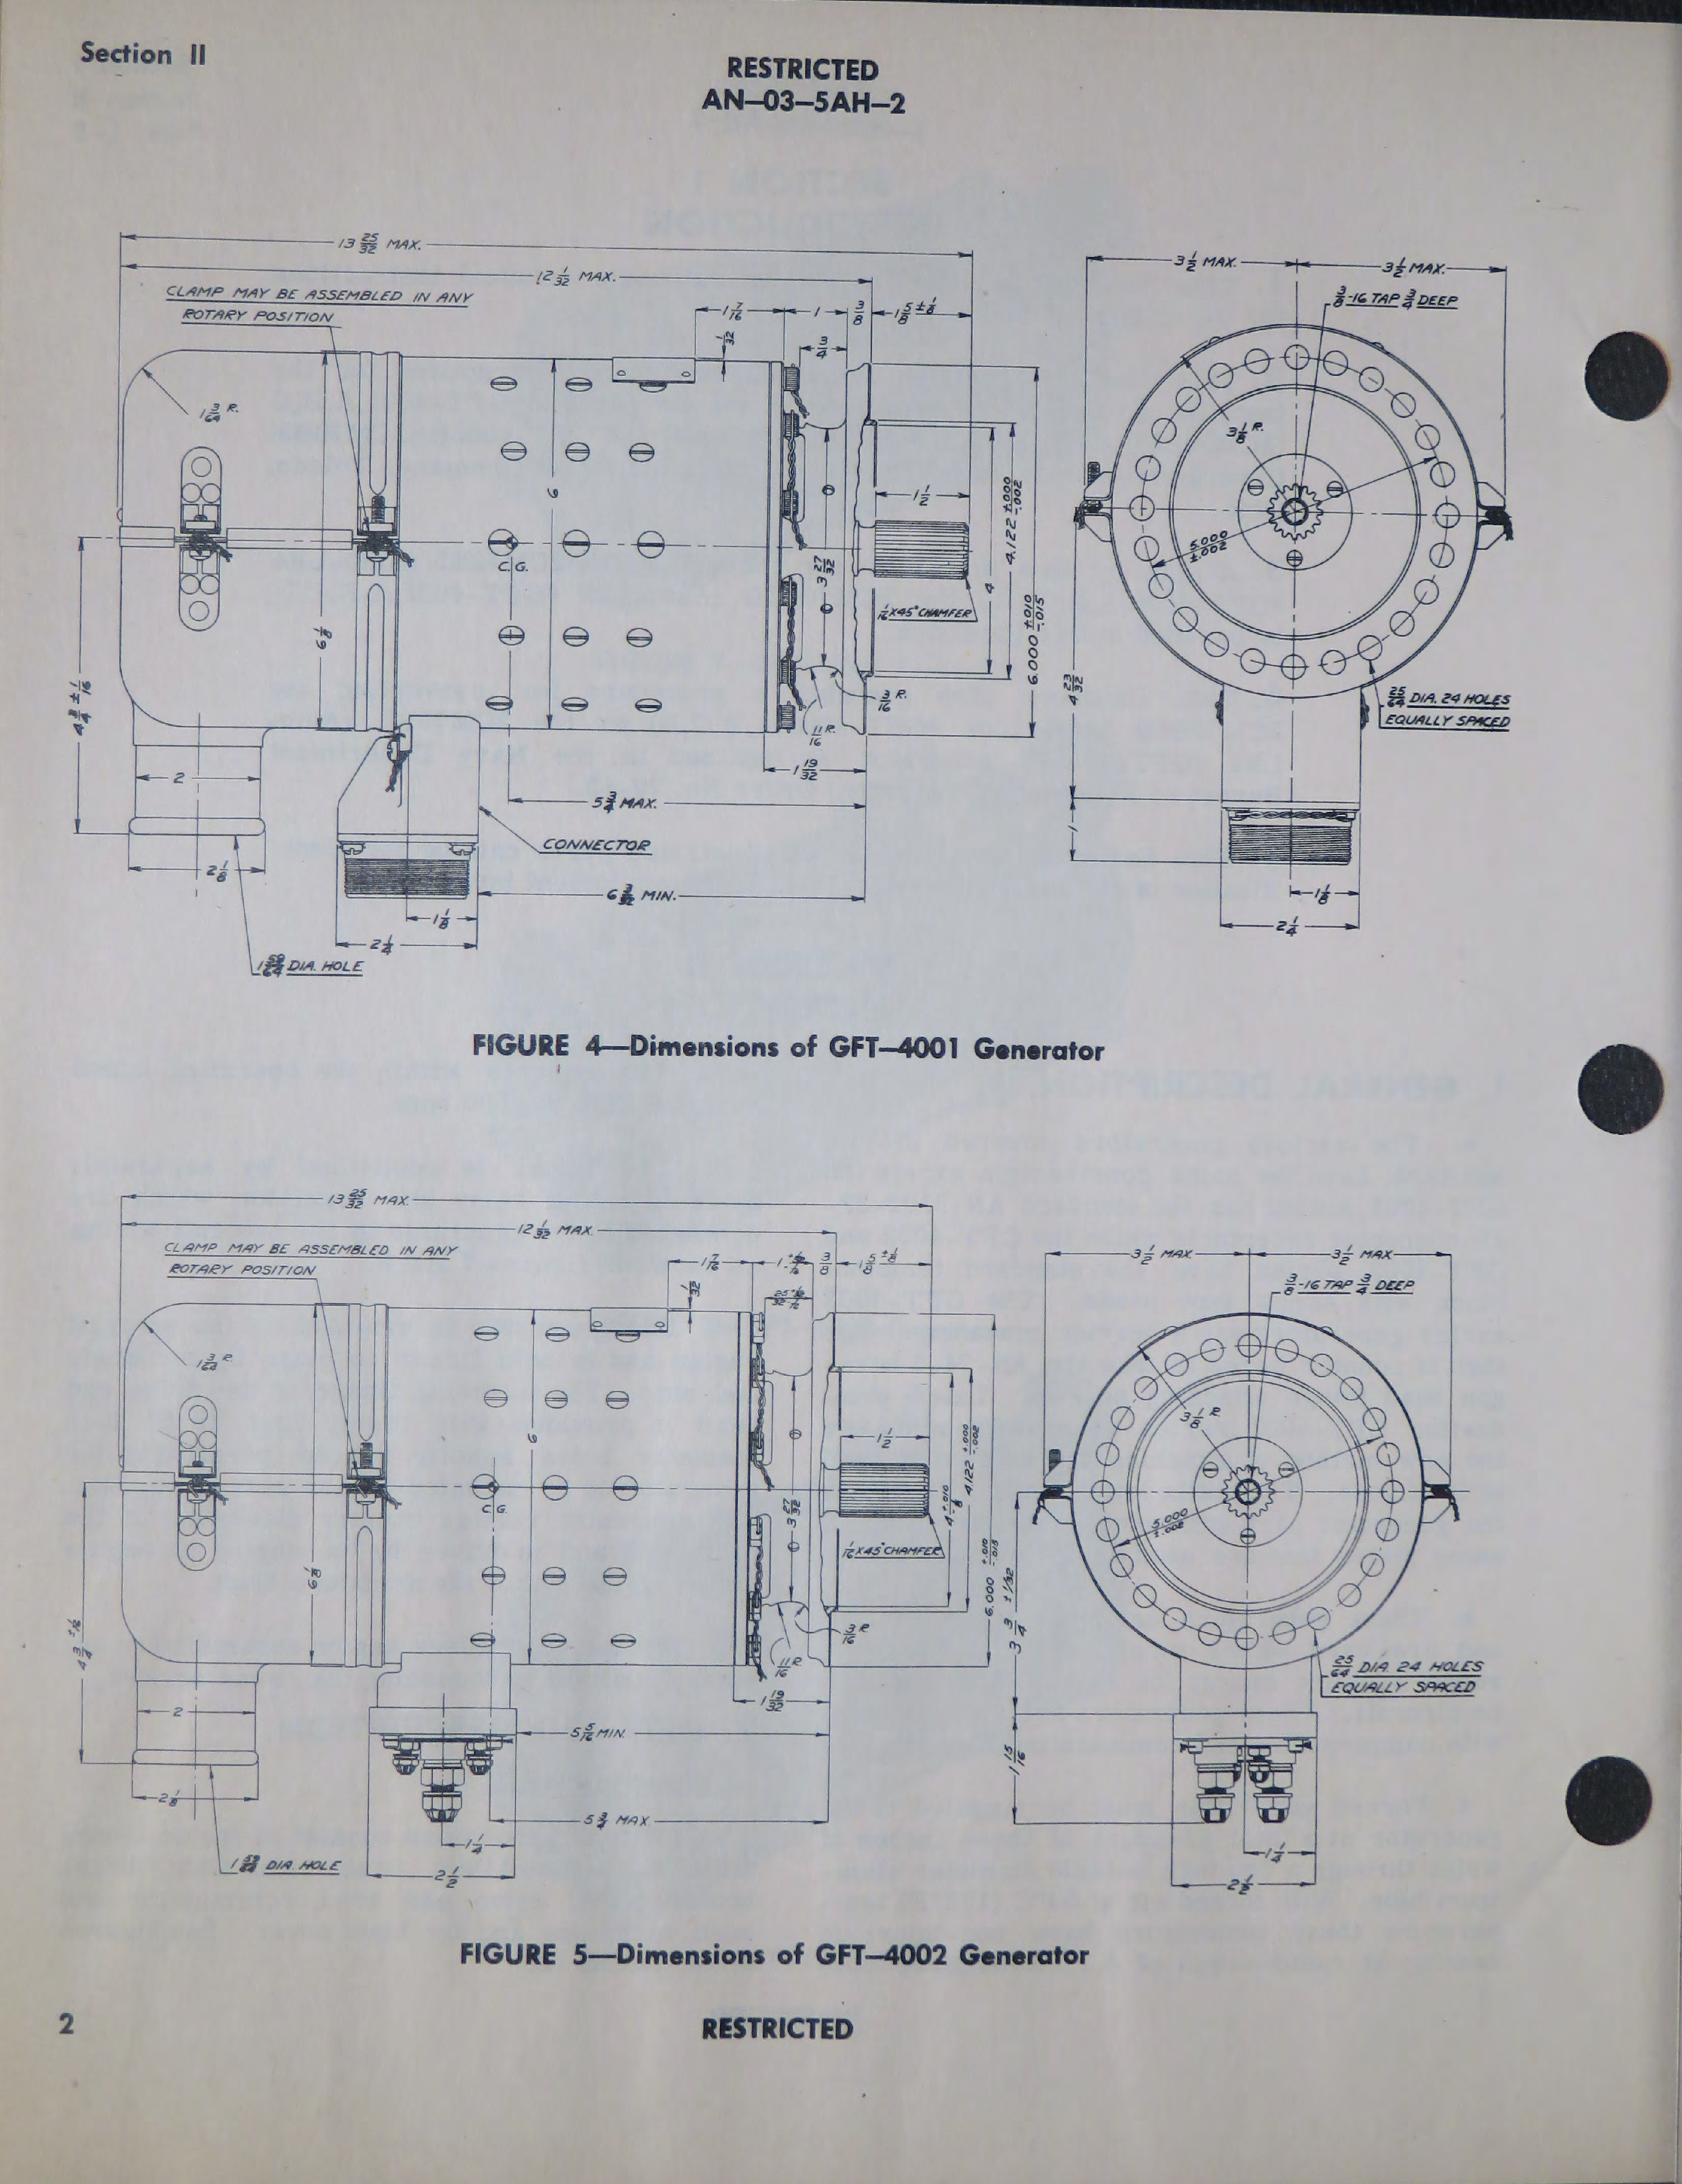 Sample page 8 from AirCorps Library document: Handbook of Instructions with Parts Catalog for Main Engine Driven Generators